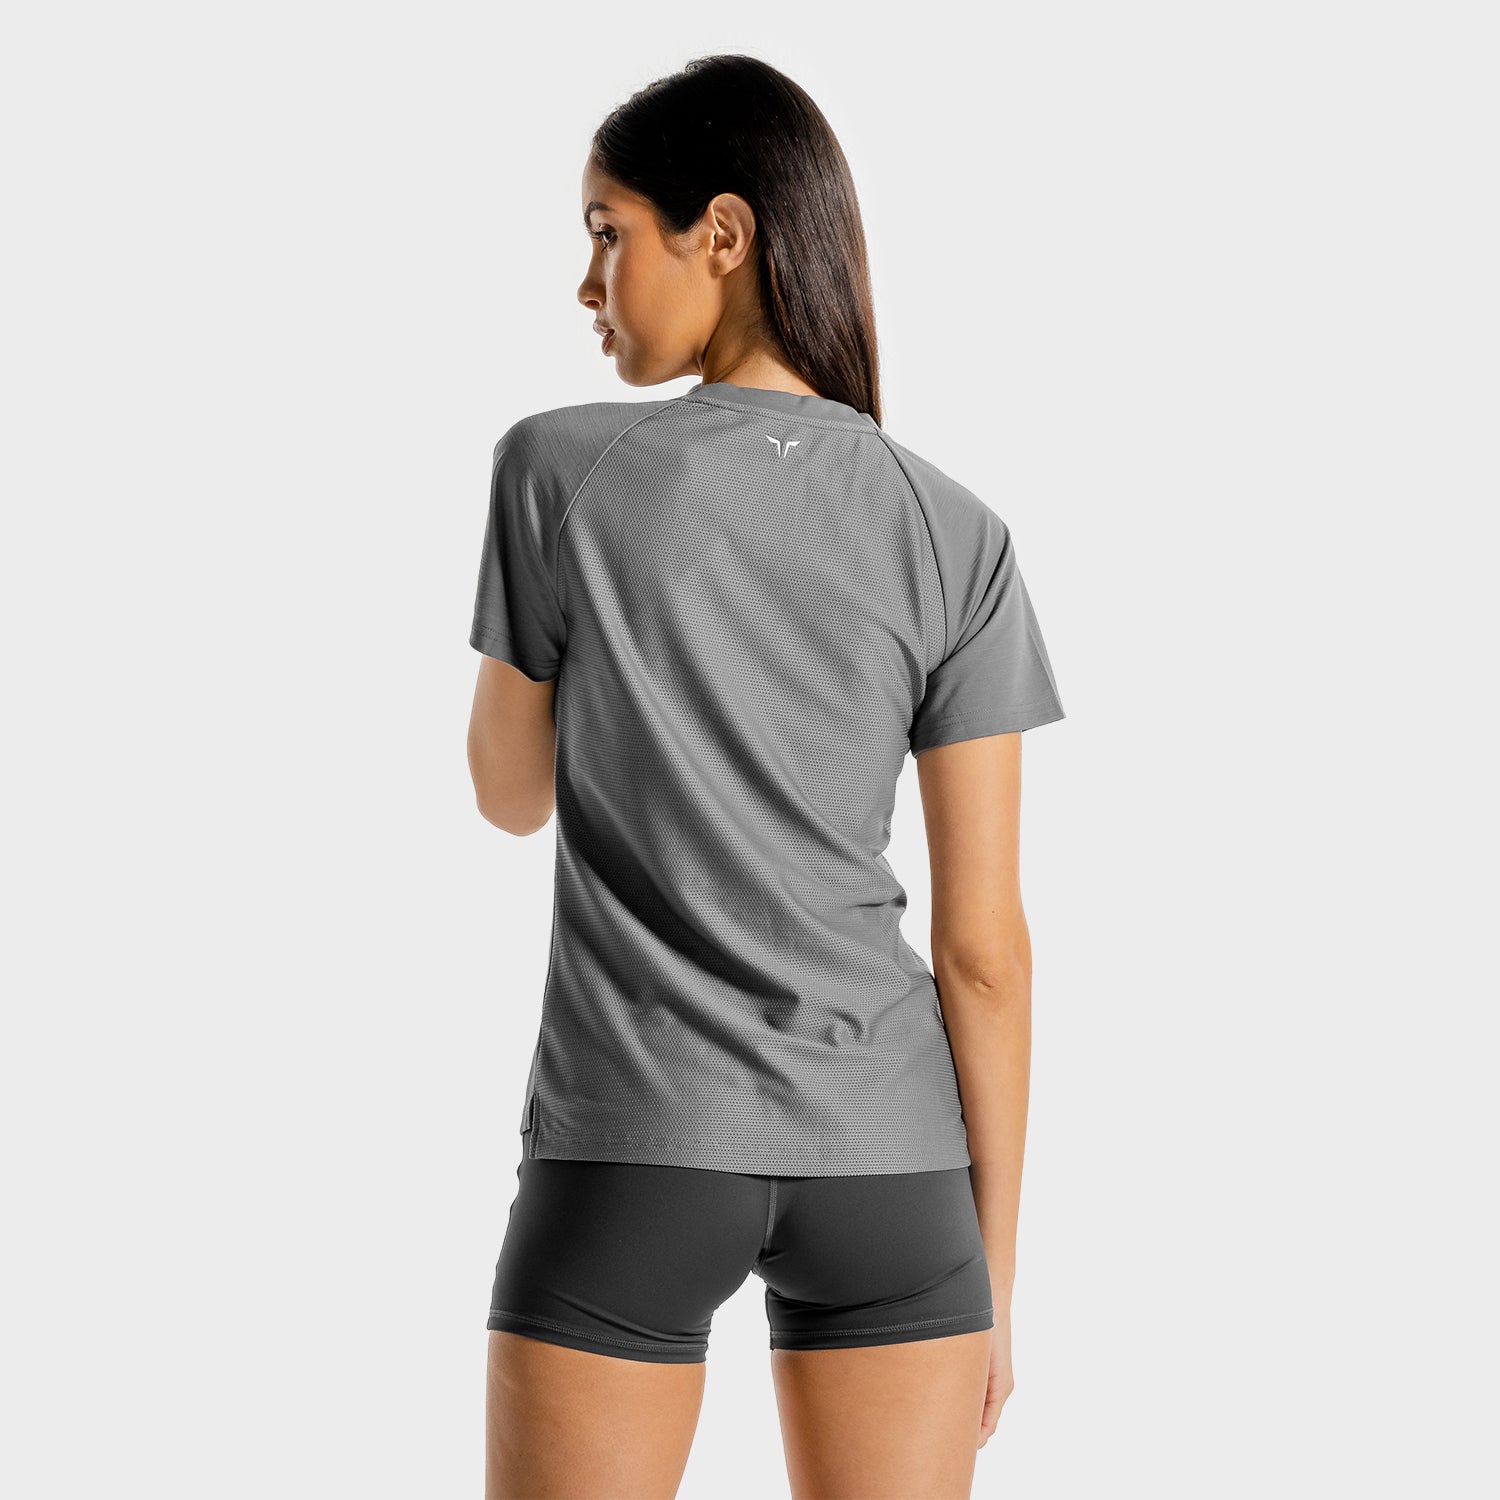 squatwolf-workout-clothes-core-slim-fit-tee-grey-gym-t-shirts-for-women